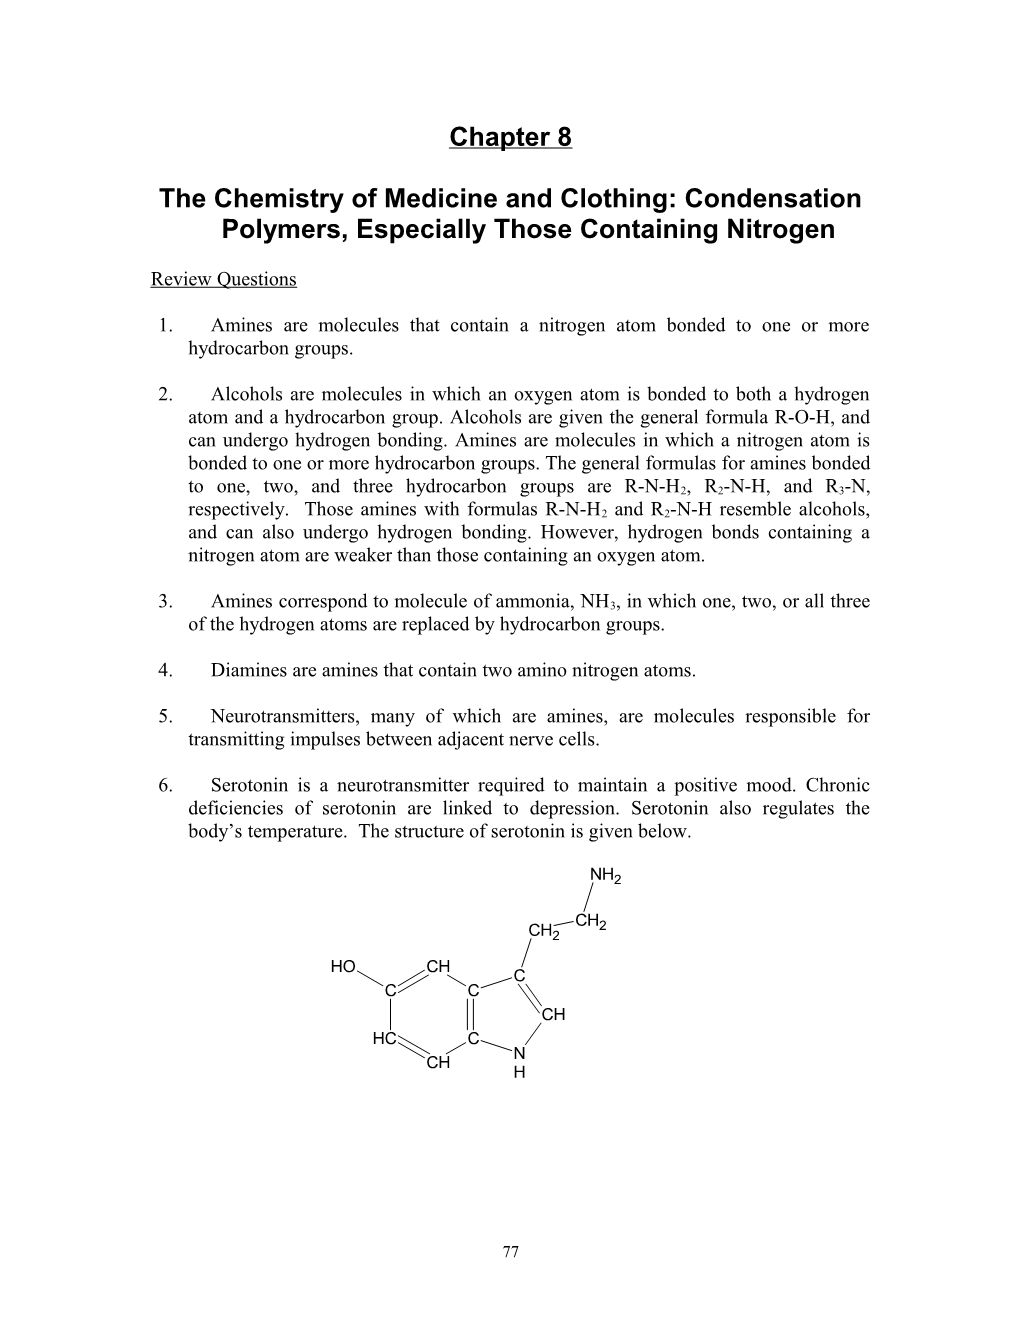 The Chemistry of Medicine and Clothing: Condensation Polymers, Especially Those Containing